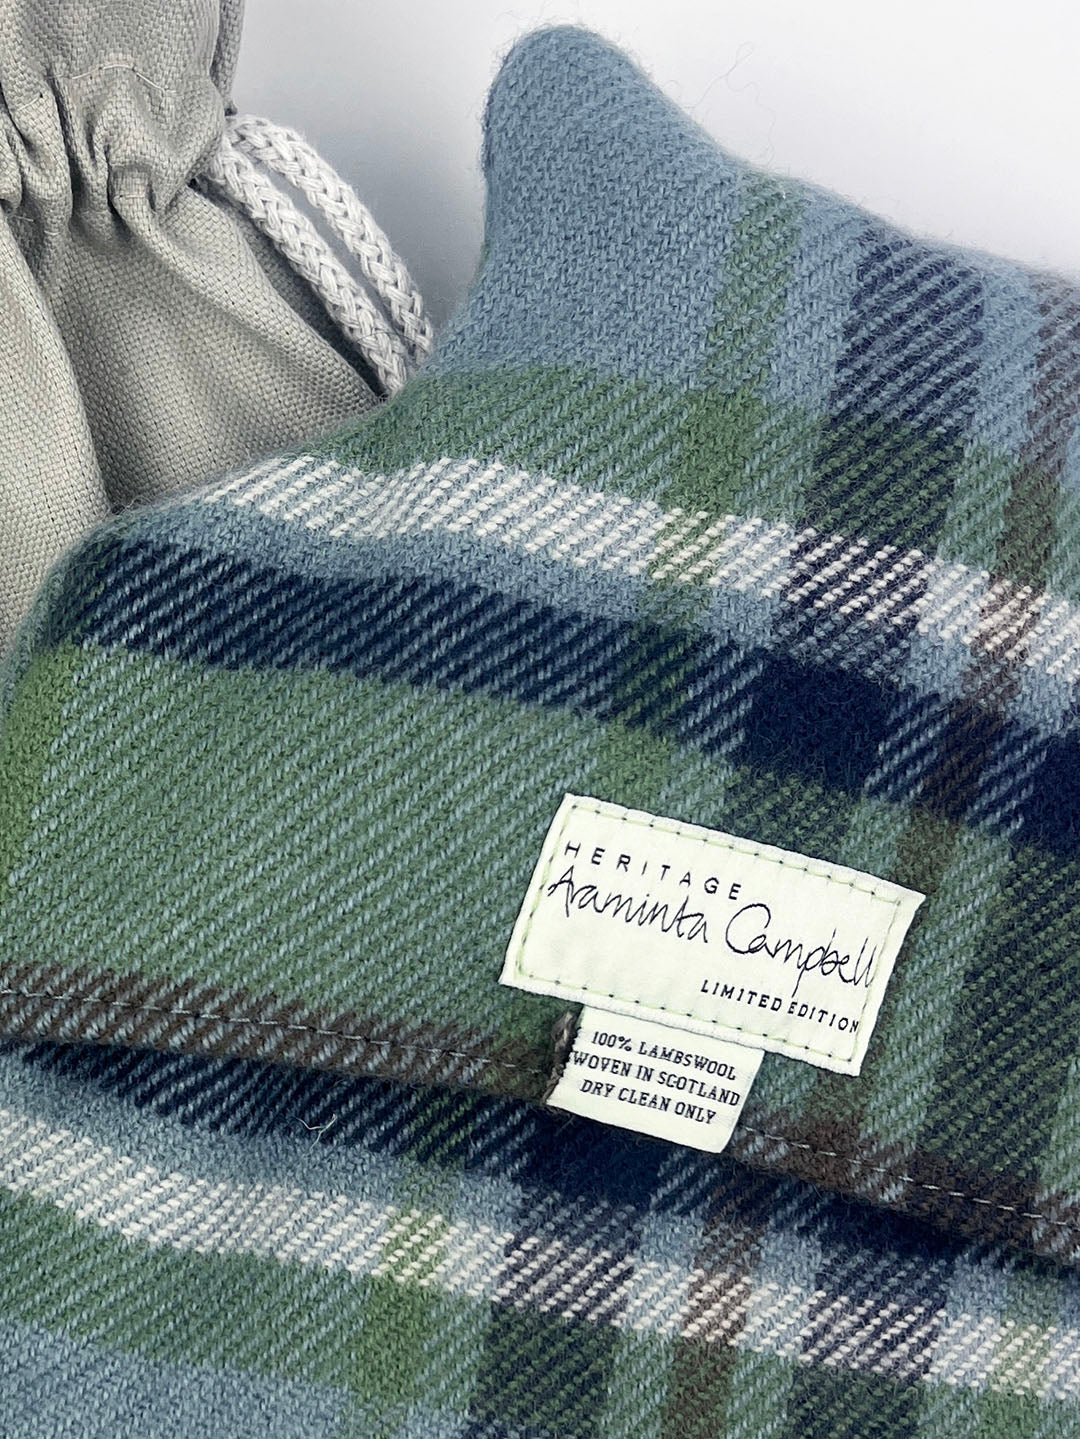 Limited edition Araminta Campbell hot water bottle, woven in 100% lambswool.